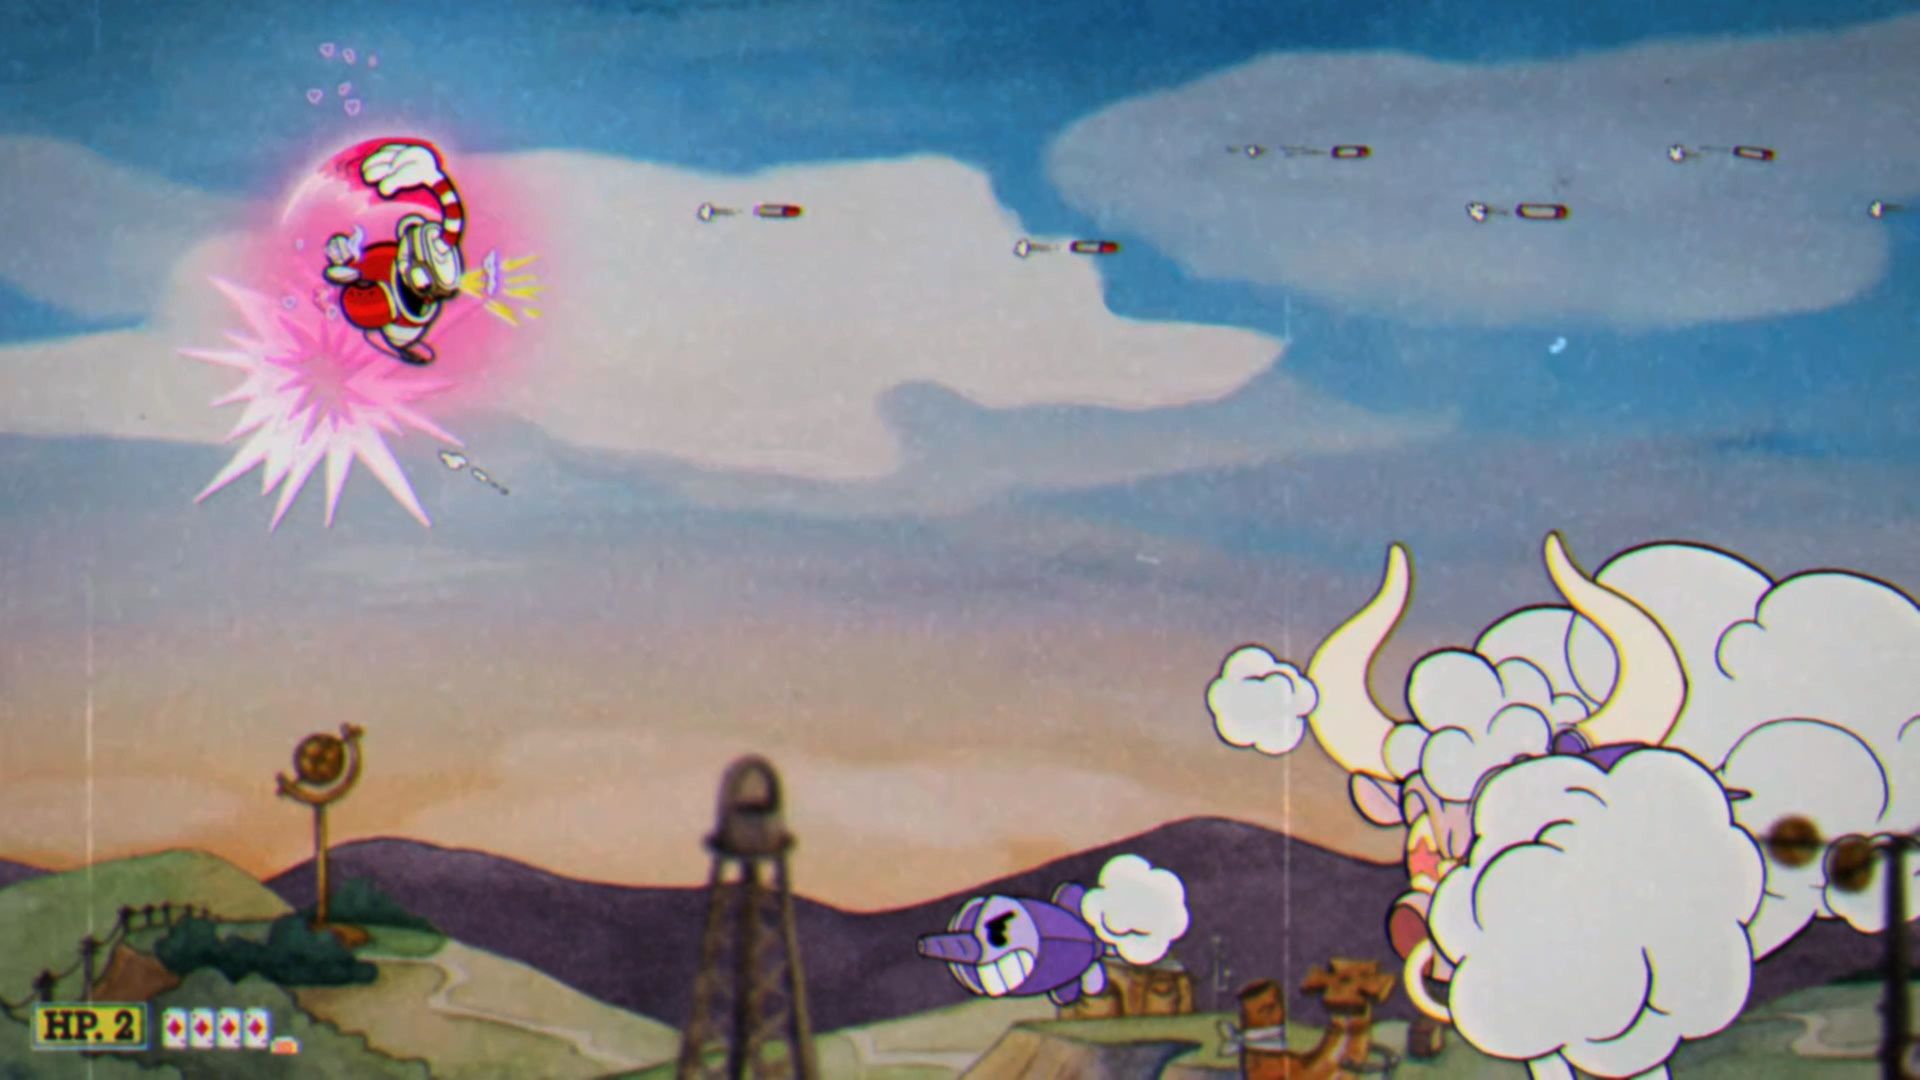 Cuphead The Delicious Course, The Angel And Devil, Parry To Recover Hearts